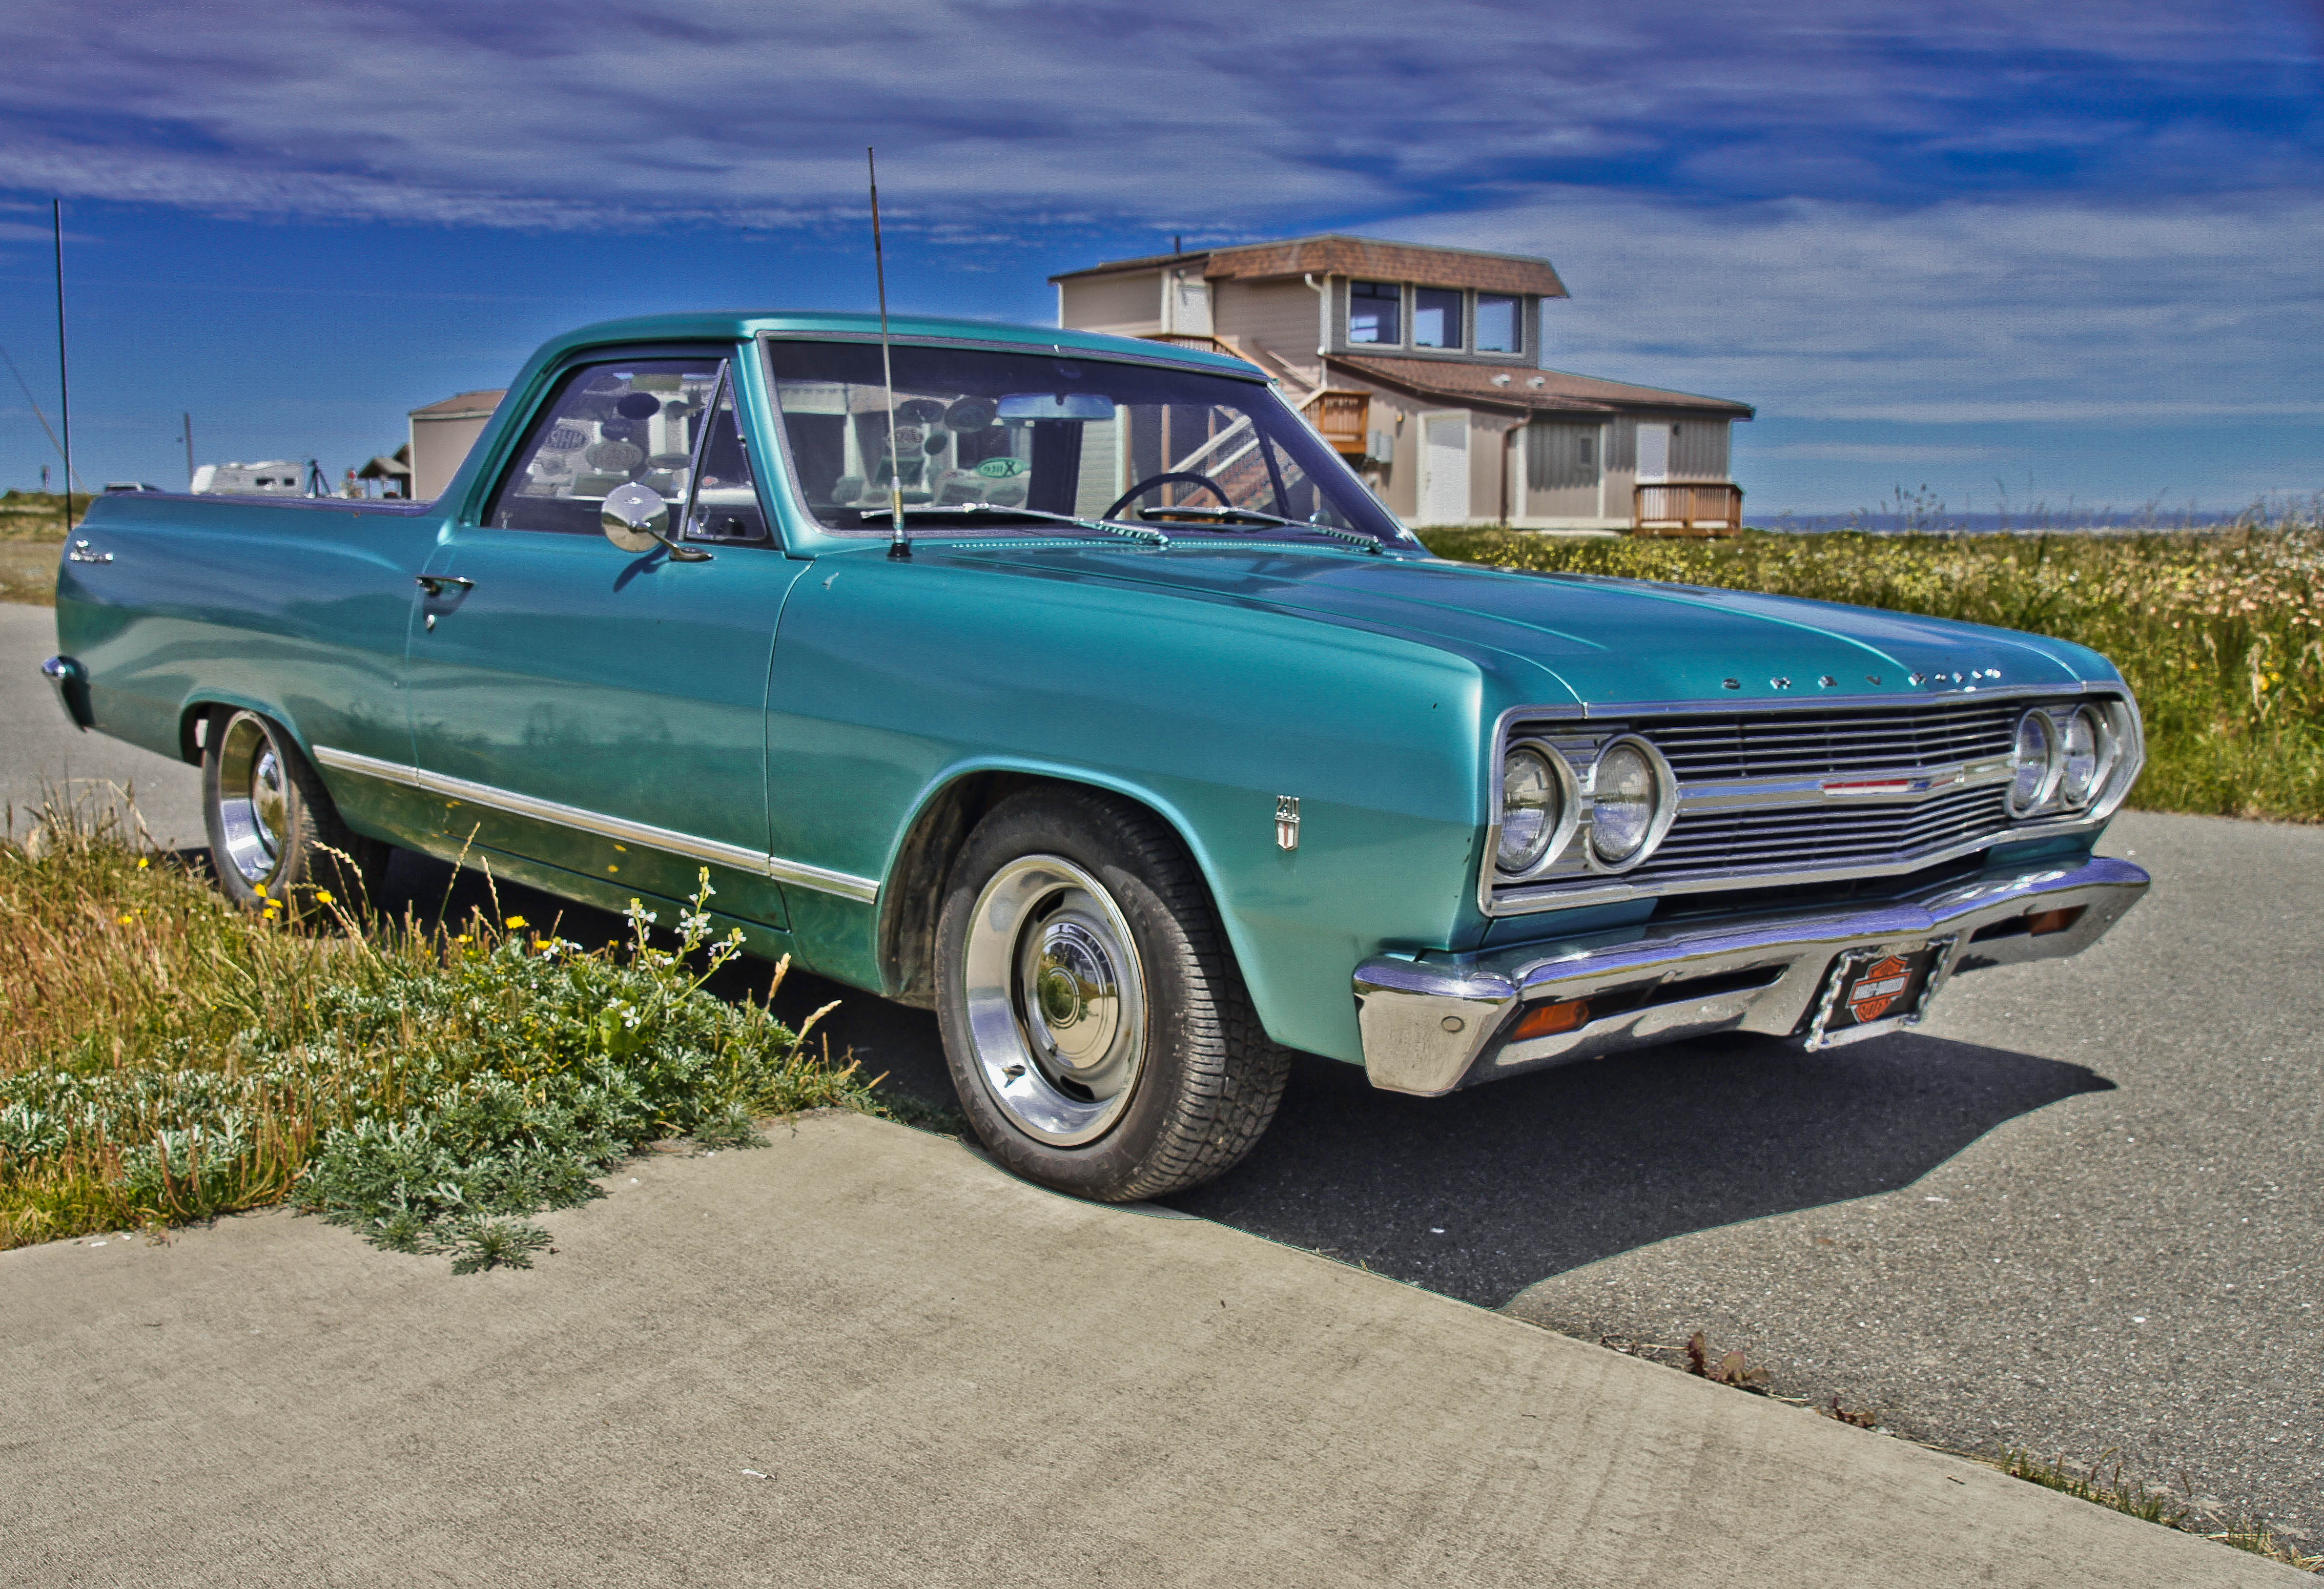 1965 Chevrolet El Camino Images | Pictures and Videos